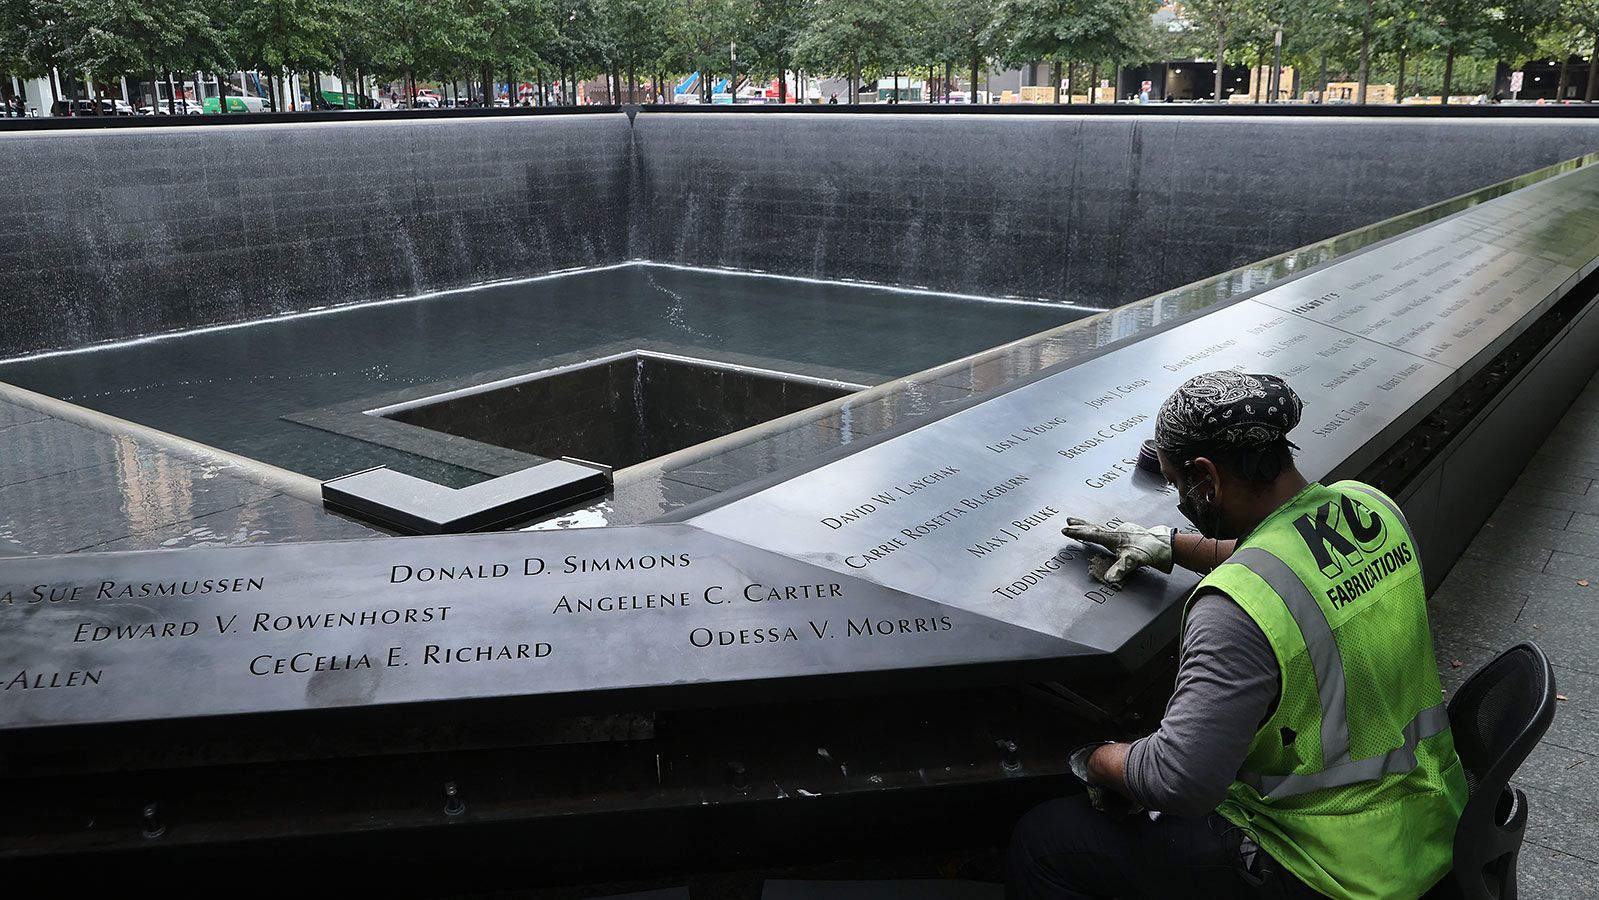 Polishing work is done on the bronze parapets surrounding the twin Memorial pools where the names of the 2,983 names of the men, women, and children killed in the attacks of September 11, 2001 and February 26, 1993 are inscribed at the 9/11 Memorial and Museum on September 8, 2021 in New York City. 